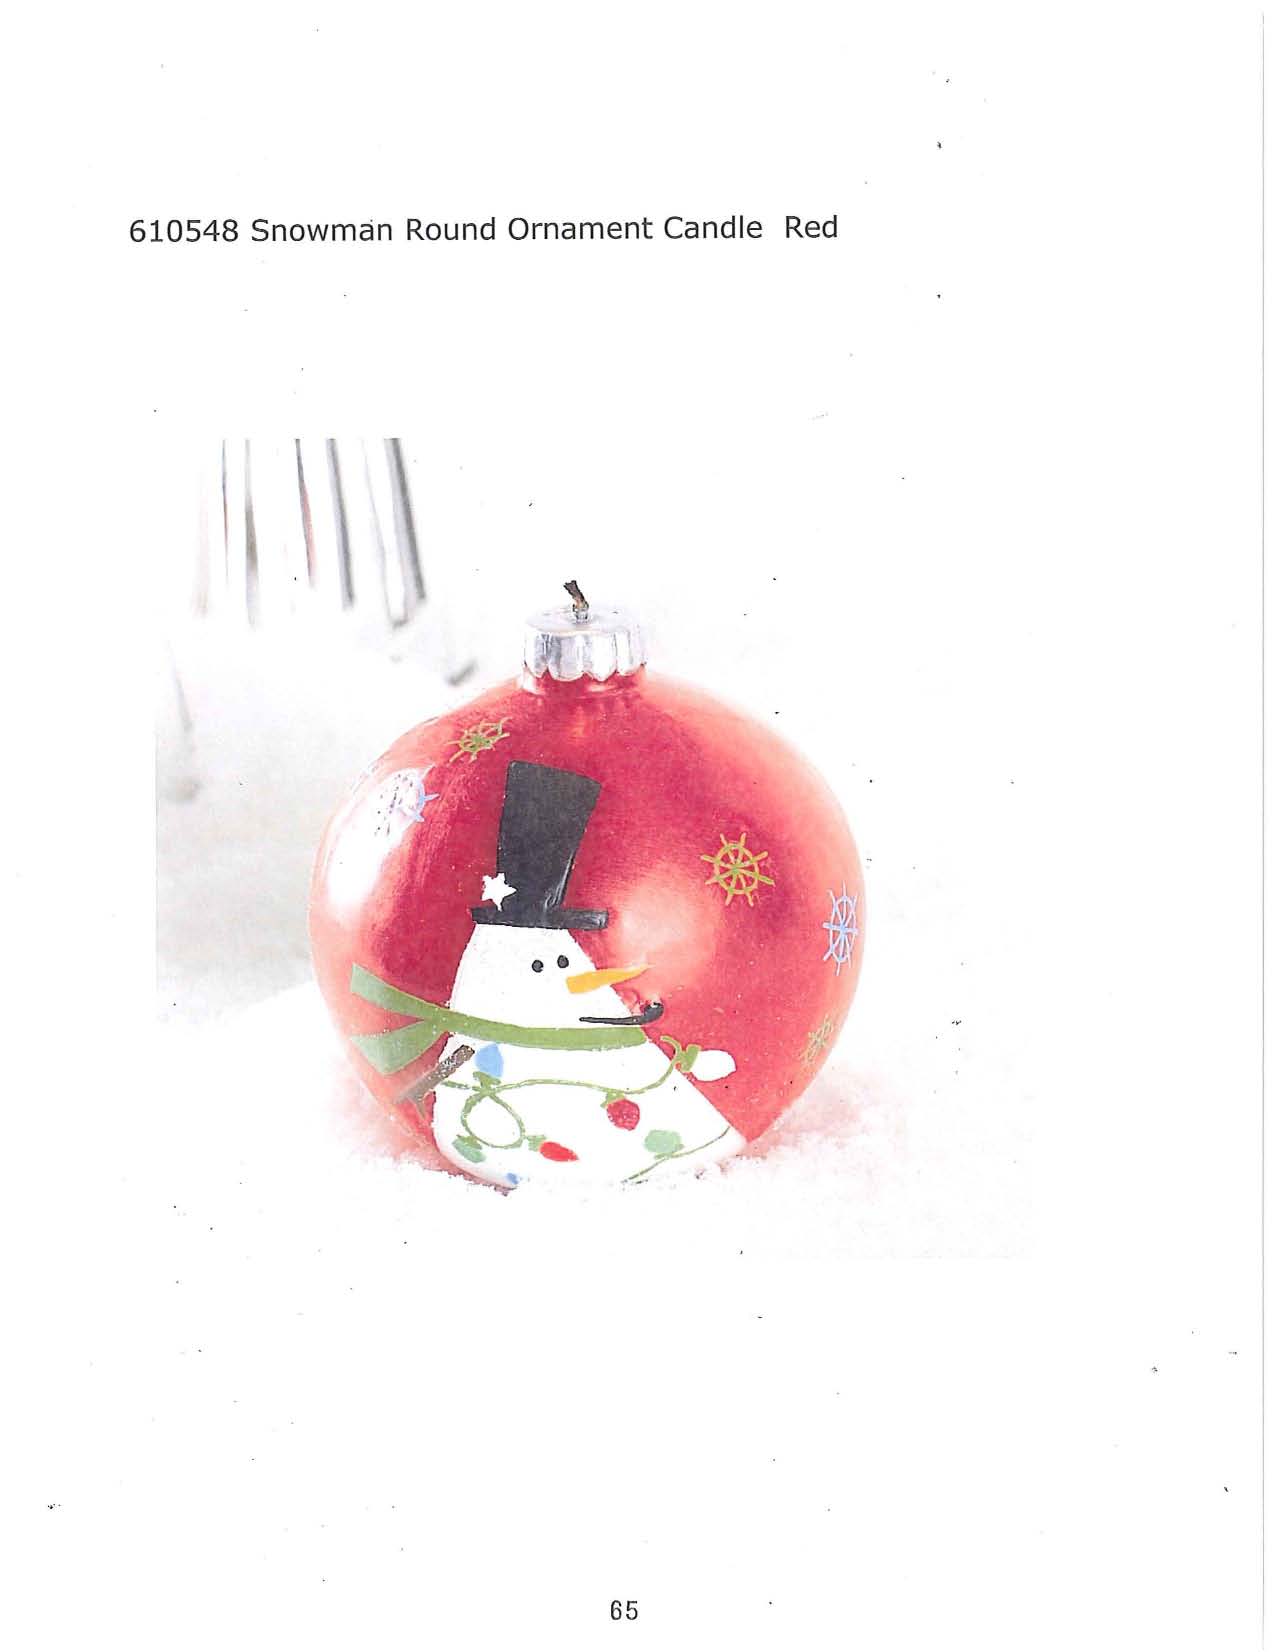 Snowman Round Ornament Candle - Red